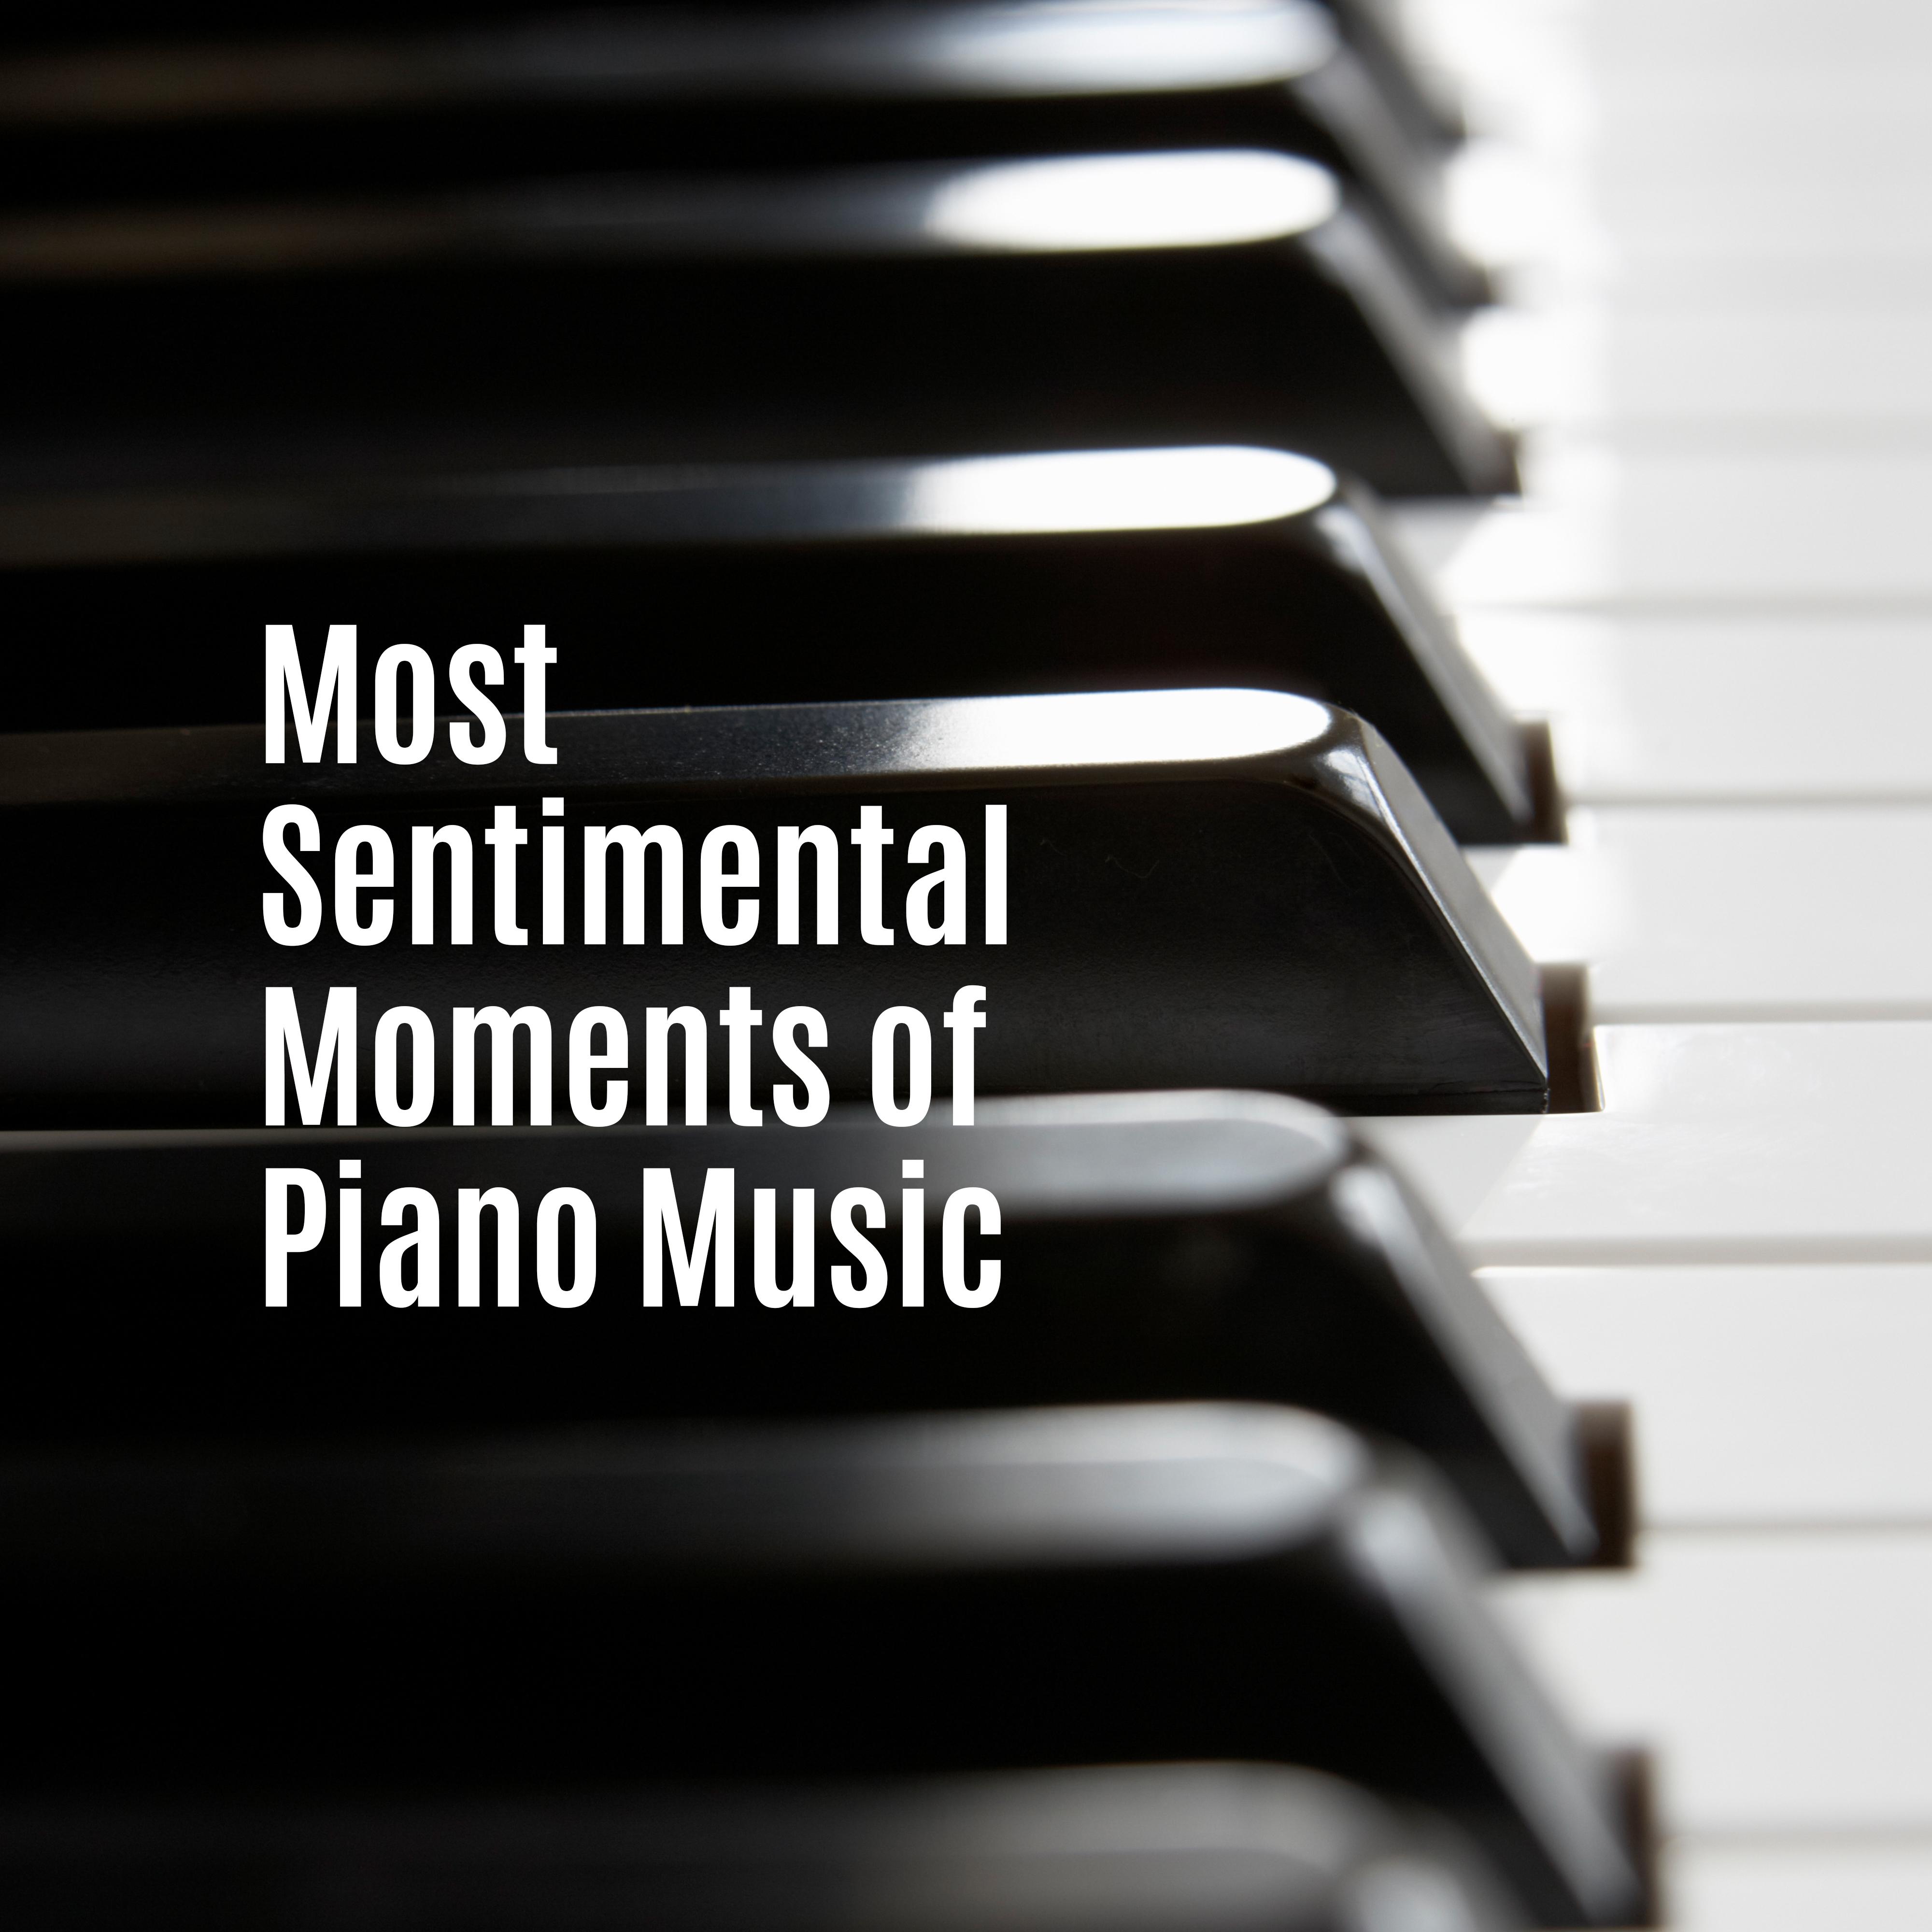 Most Sentimental Moments of Piano Music: 2019 Piano Jazz Music Collection, Most Beautiful Melodies for Sad Moments, Bad Mood, Longing for Someone Important to You